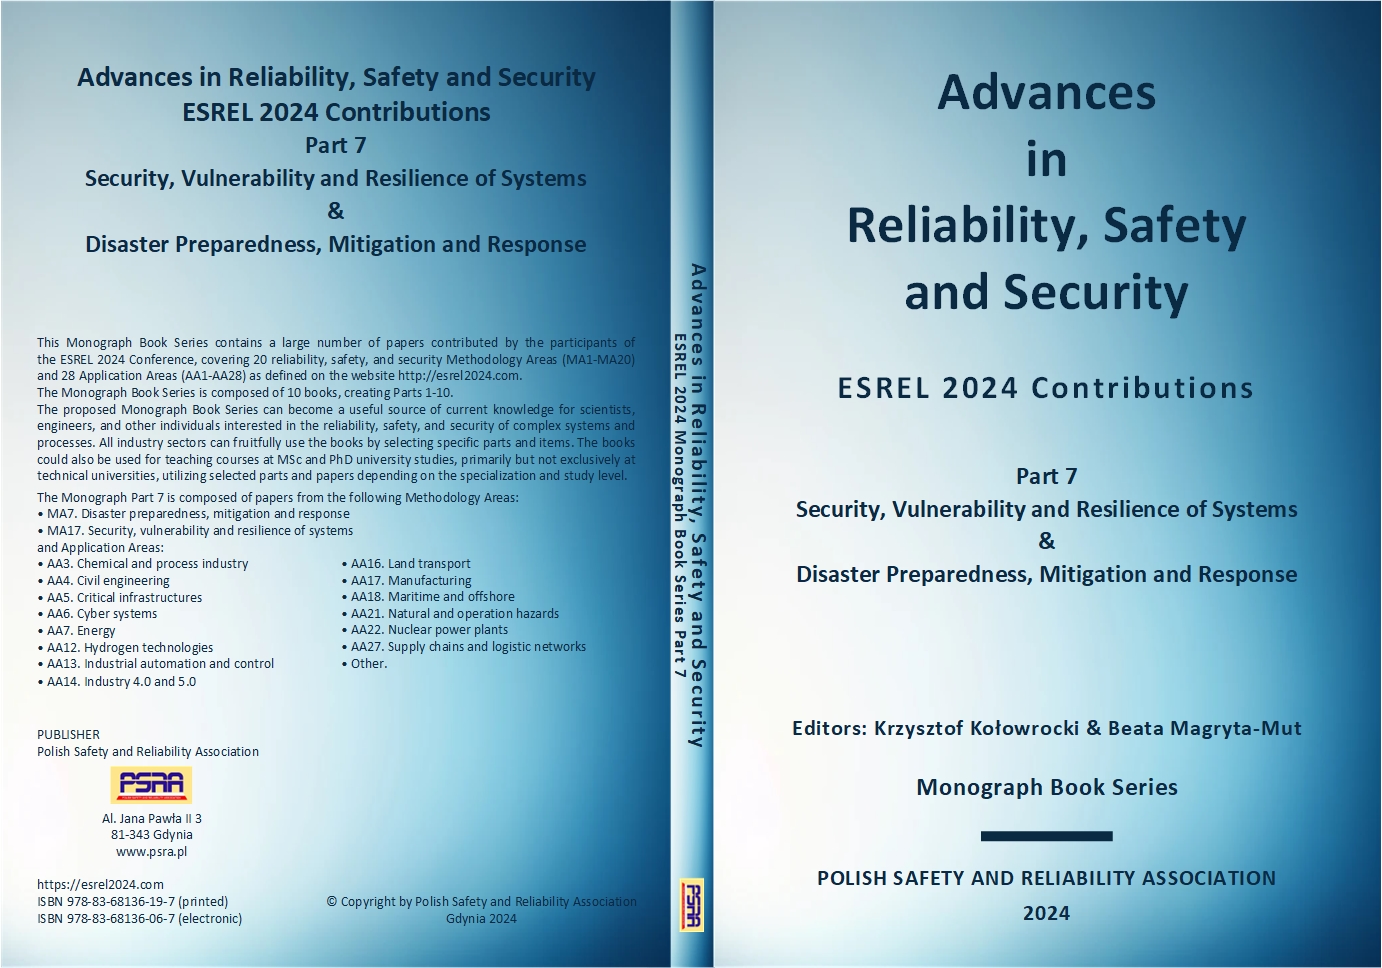 Part 7 Security, Vulnerability and Resilience of Systems & Disaster Preparedness, Mitigation and Response